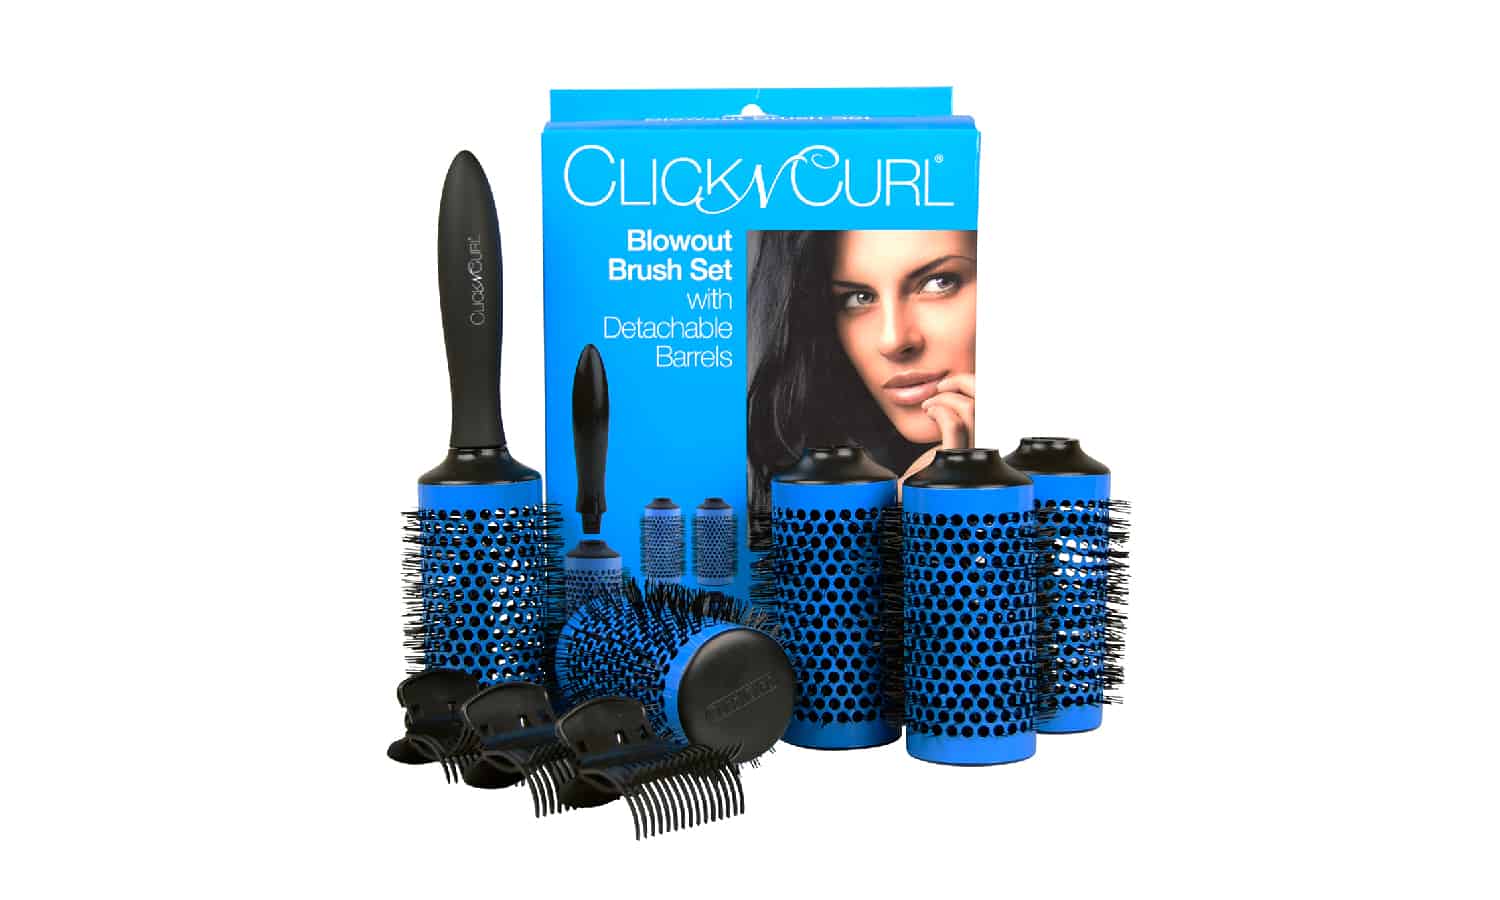 Full Set of Large Click n Curl Detachable Blowout Brushes